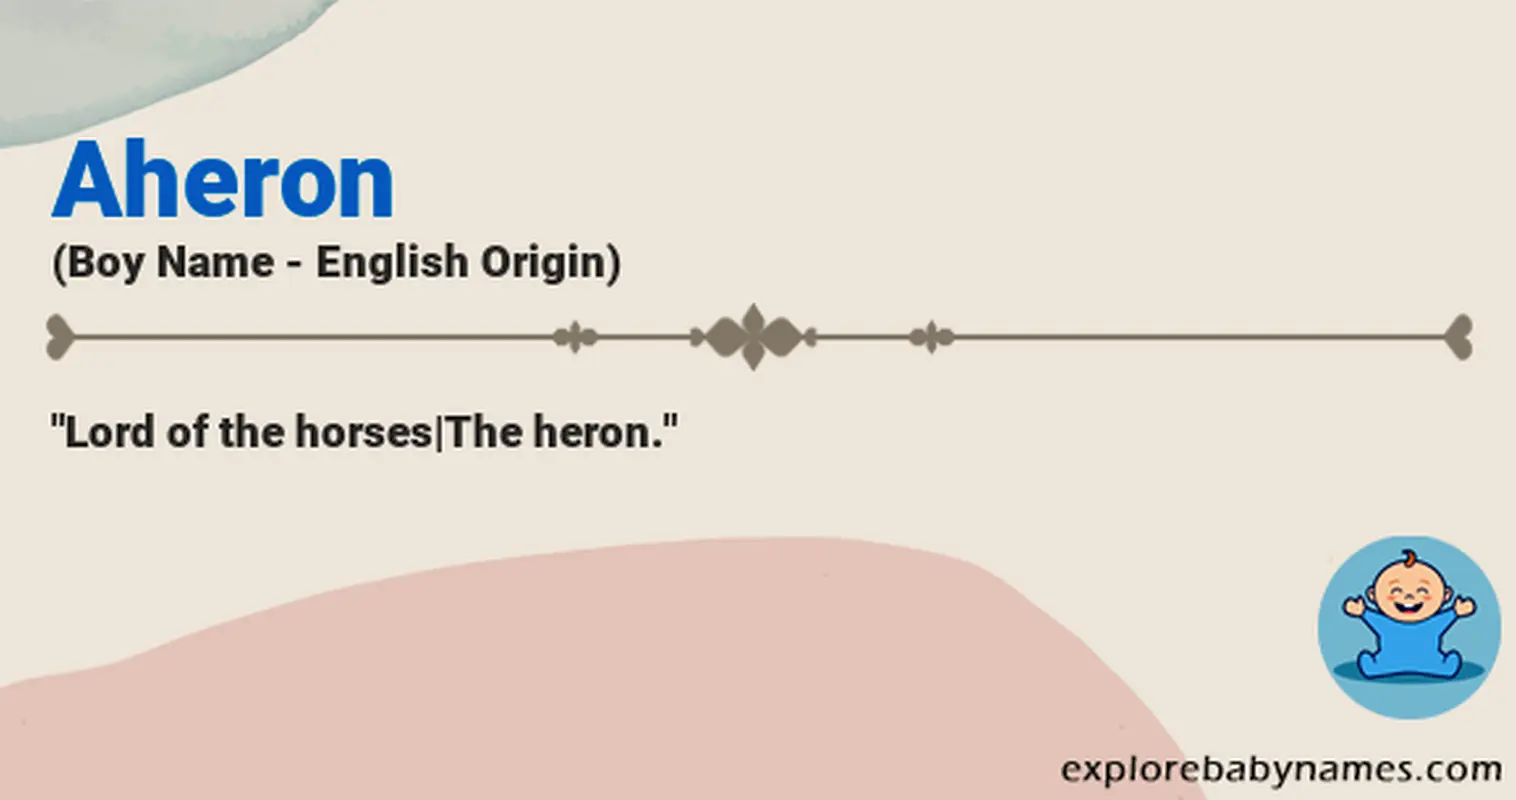 Meaning of Aheron